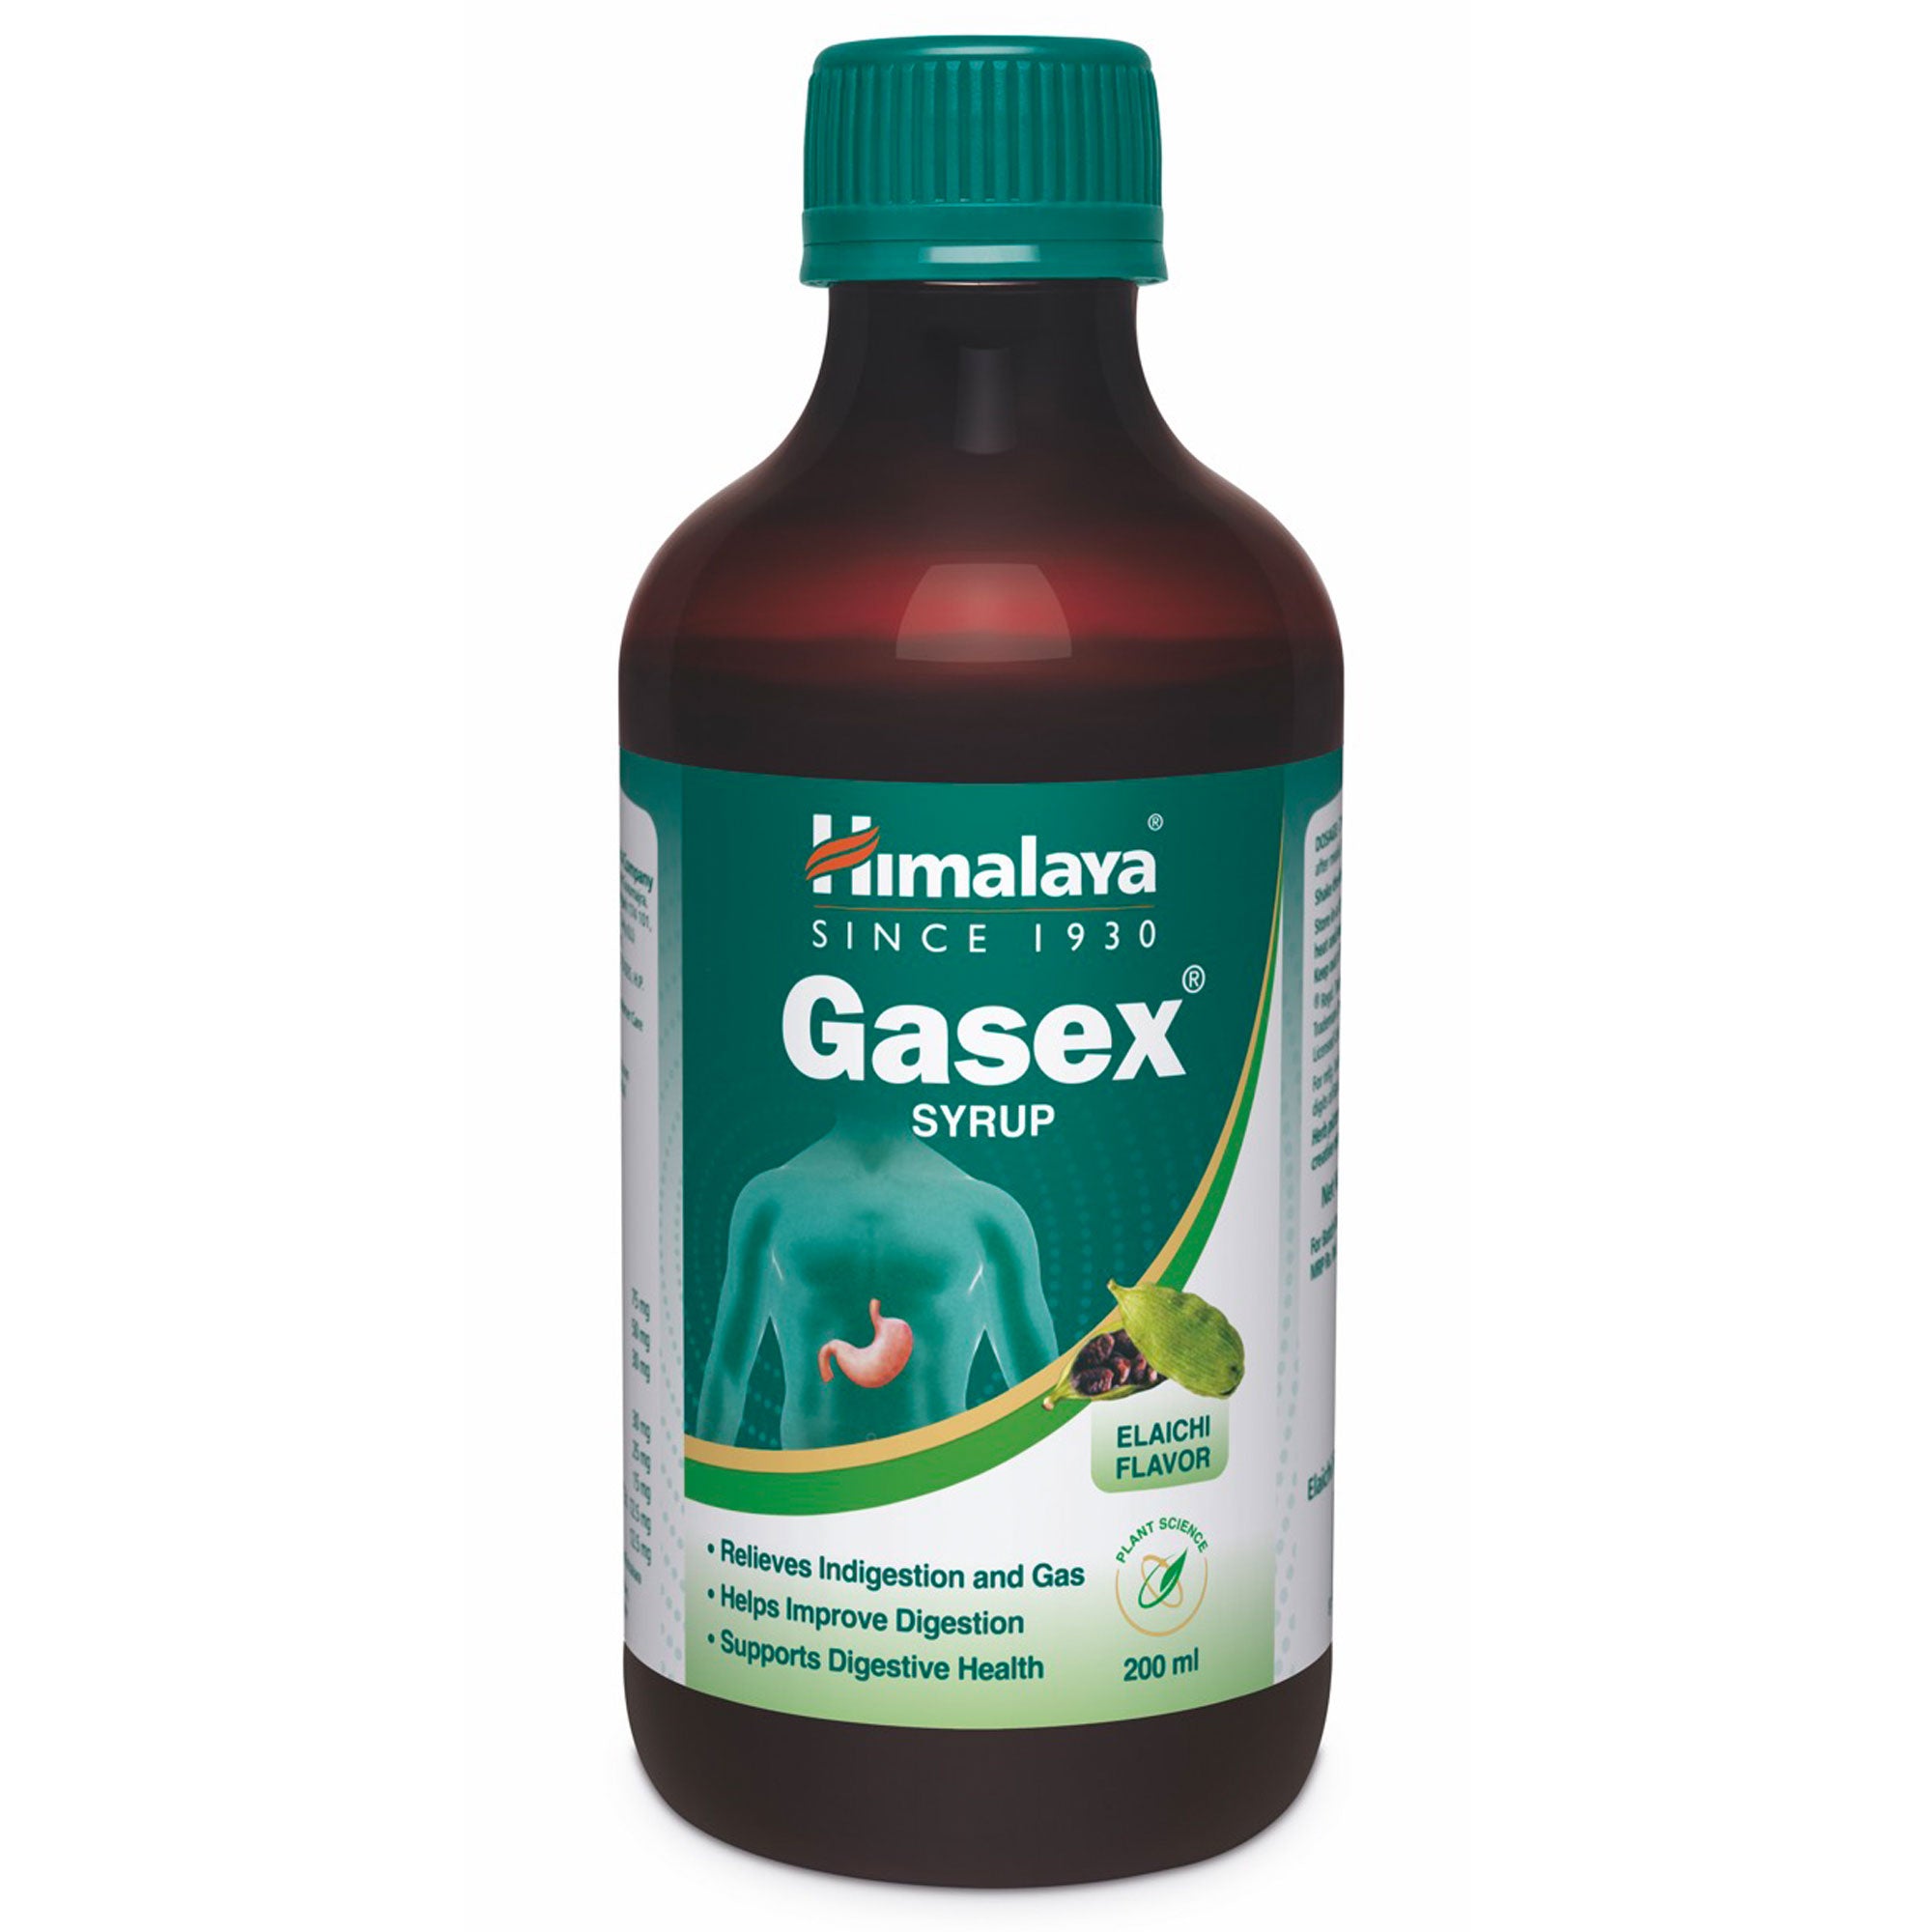 Gasex Syrup